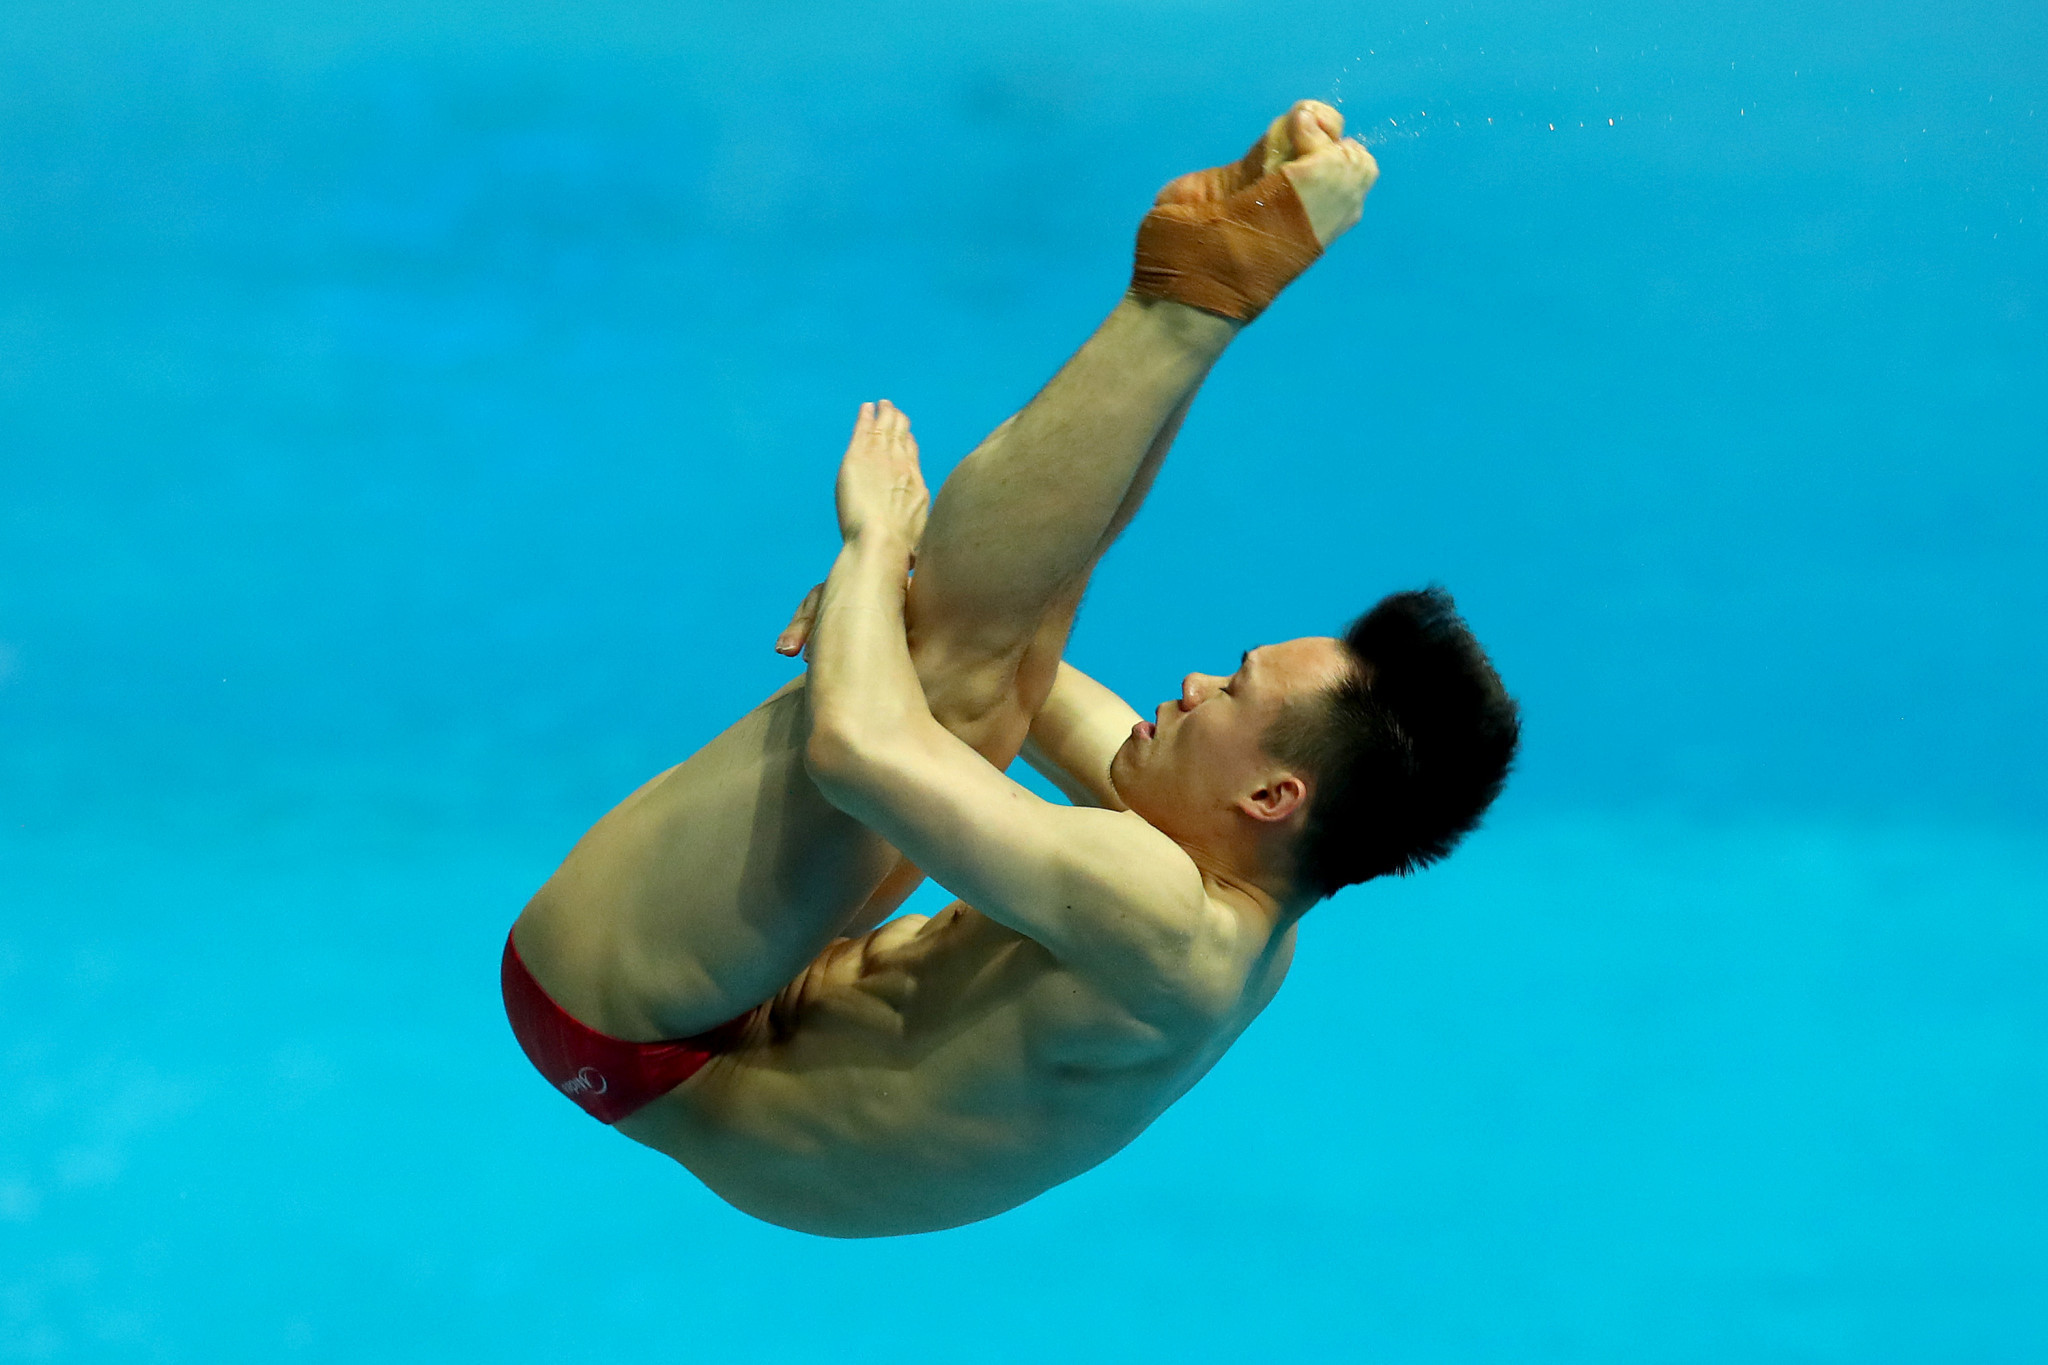 Xie Siyi picked up the men's diving accolade after double gold in Gwangju ©Getty Images